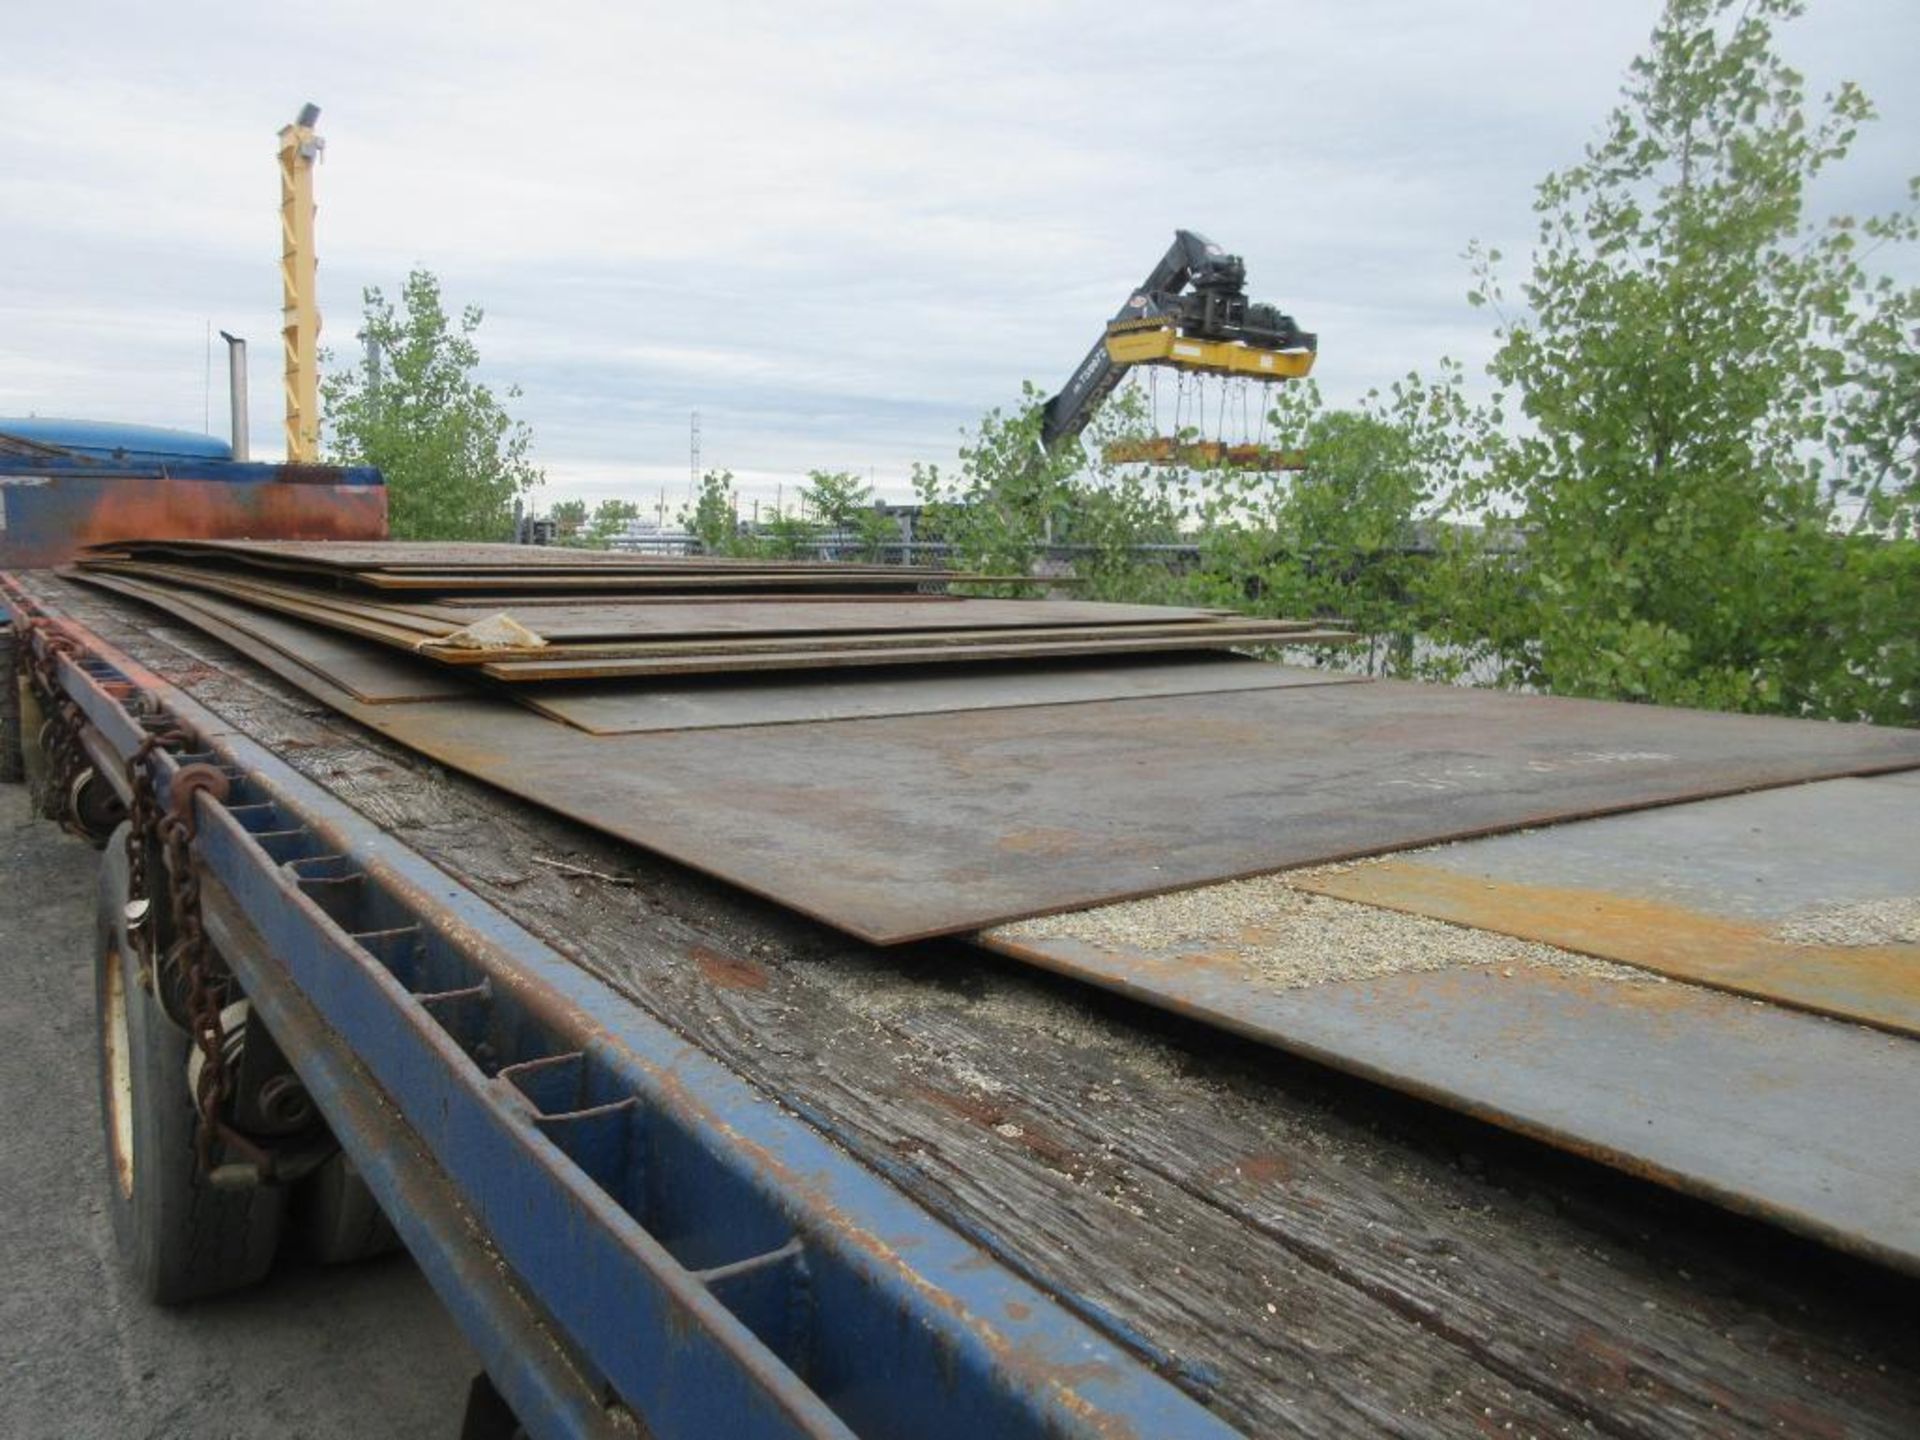 LOT OF 27 SHEETS OF PLATE STEEL ON TRAILER (NO TRAILER), TOTAL WEIGHT 293,559 LBS, SIZES PER PHOTO ( - Image 12 of 14